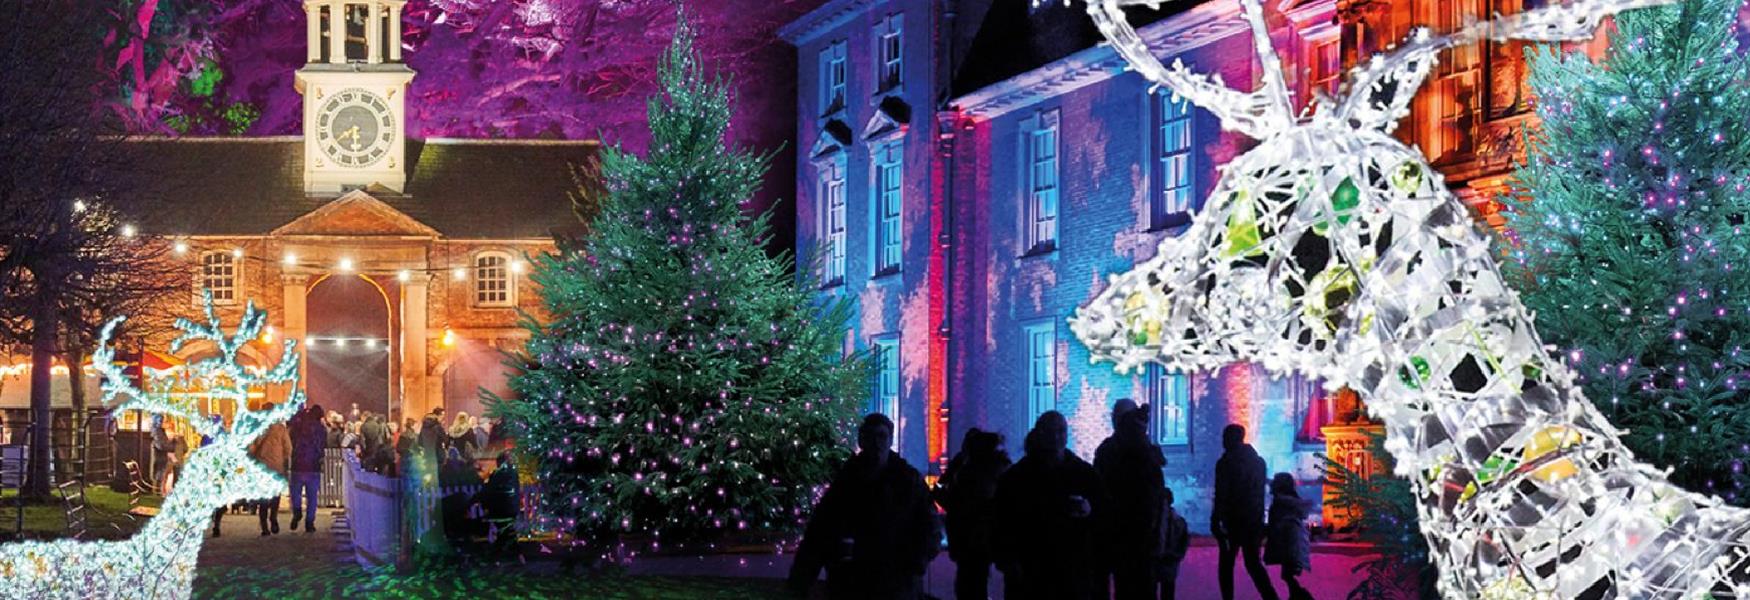 What's on in Cheshire this Christmas?